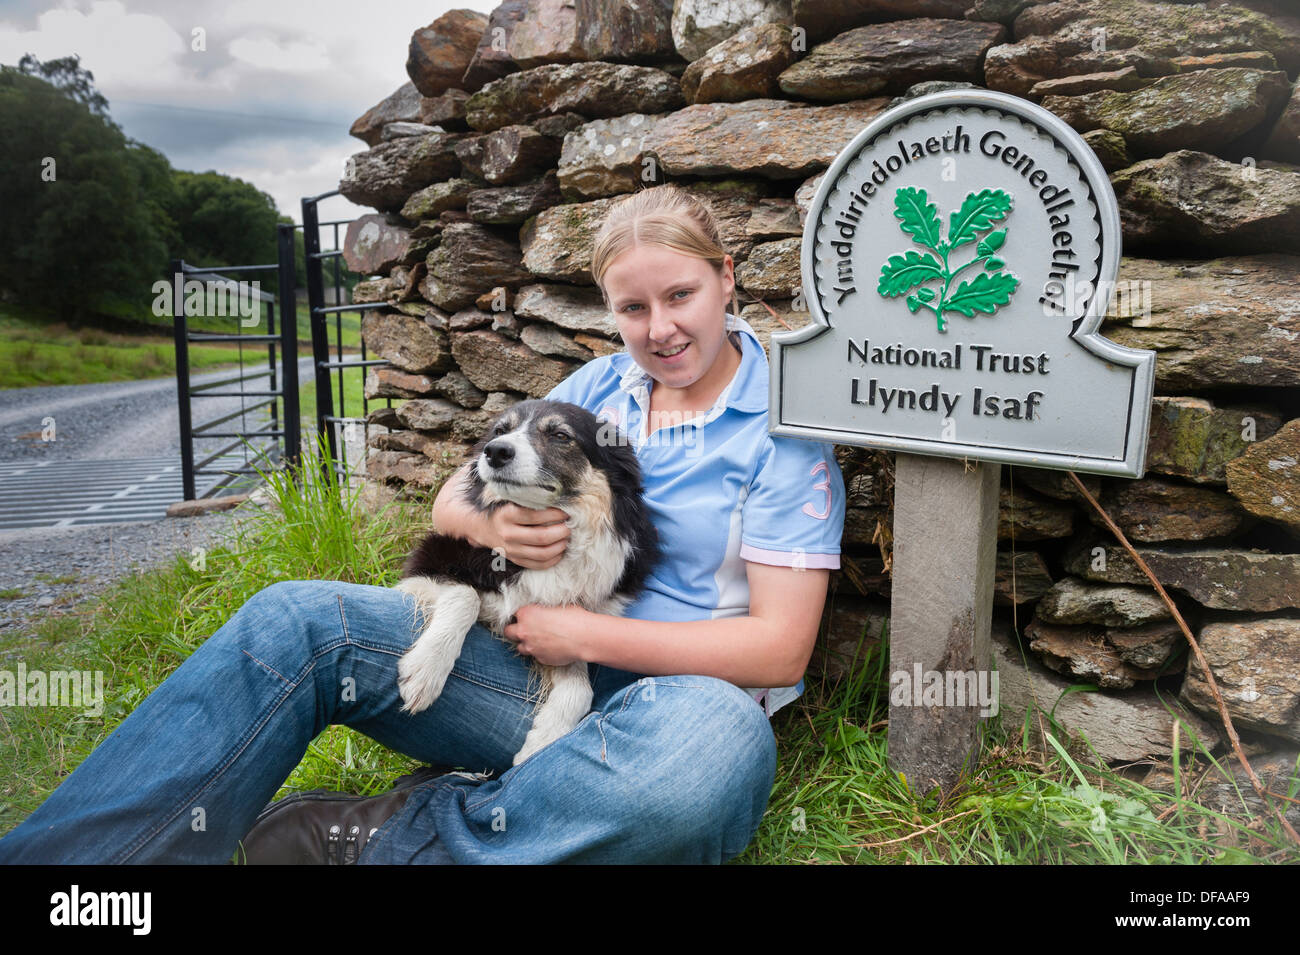 Caryl Hughes, with her sheepdog Mist, who will be farming the National Trust land at Llyndy Isaf farm, near Beddgelert Wales UK Stock Photo